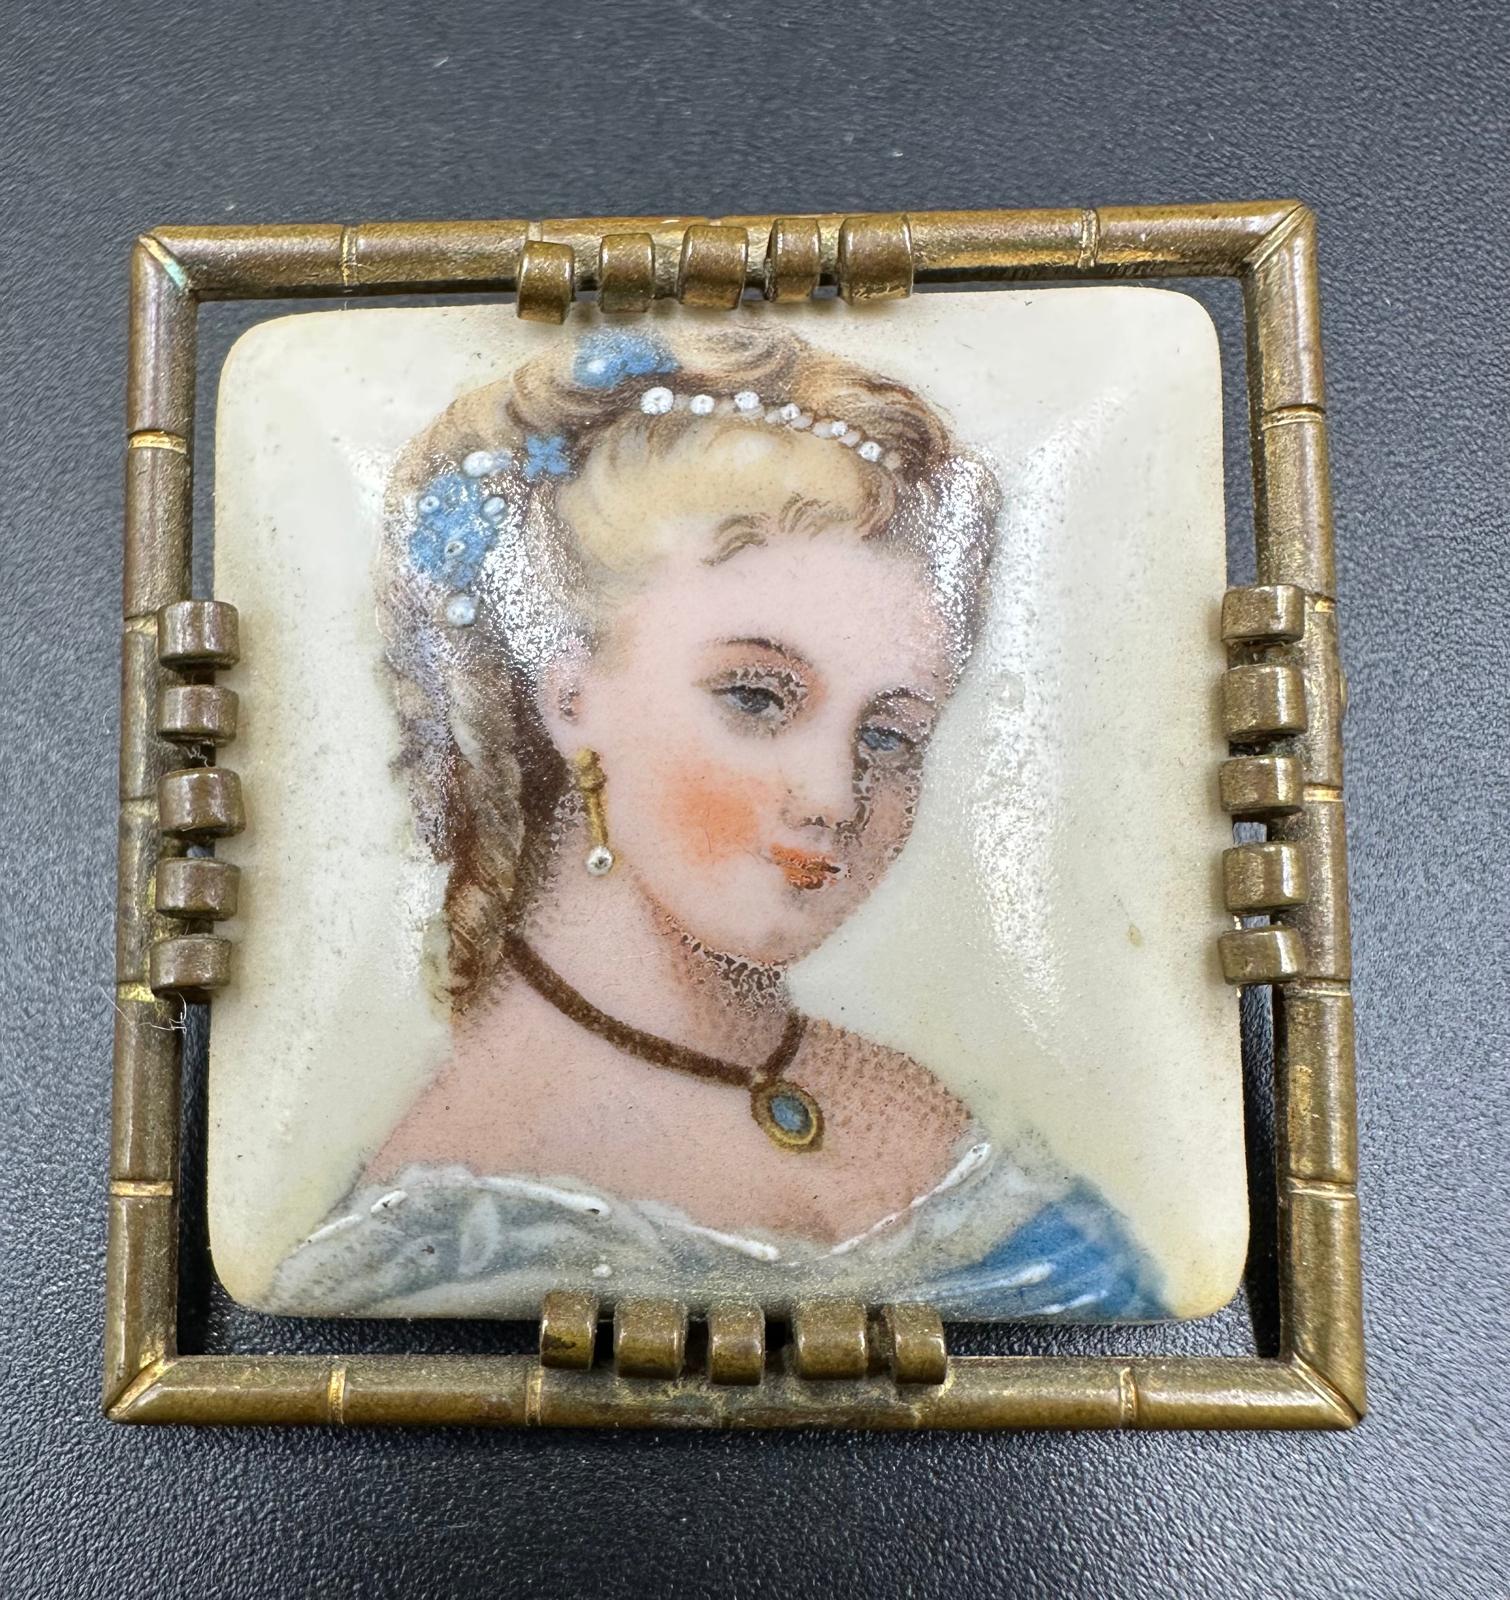 Limoges France porcelain portrait brooch pair from the mid 20th century - Image 7 of 10